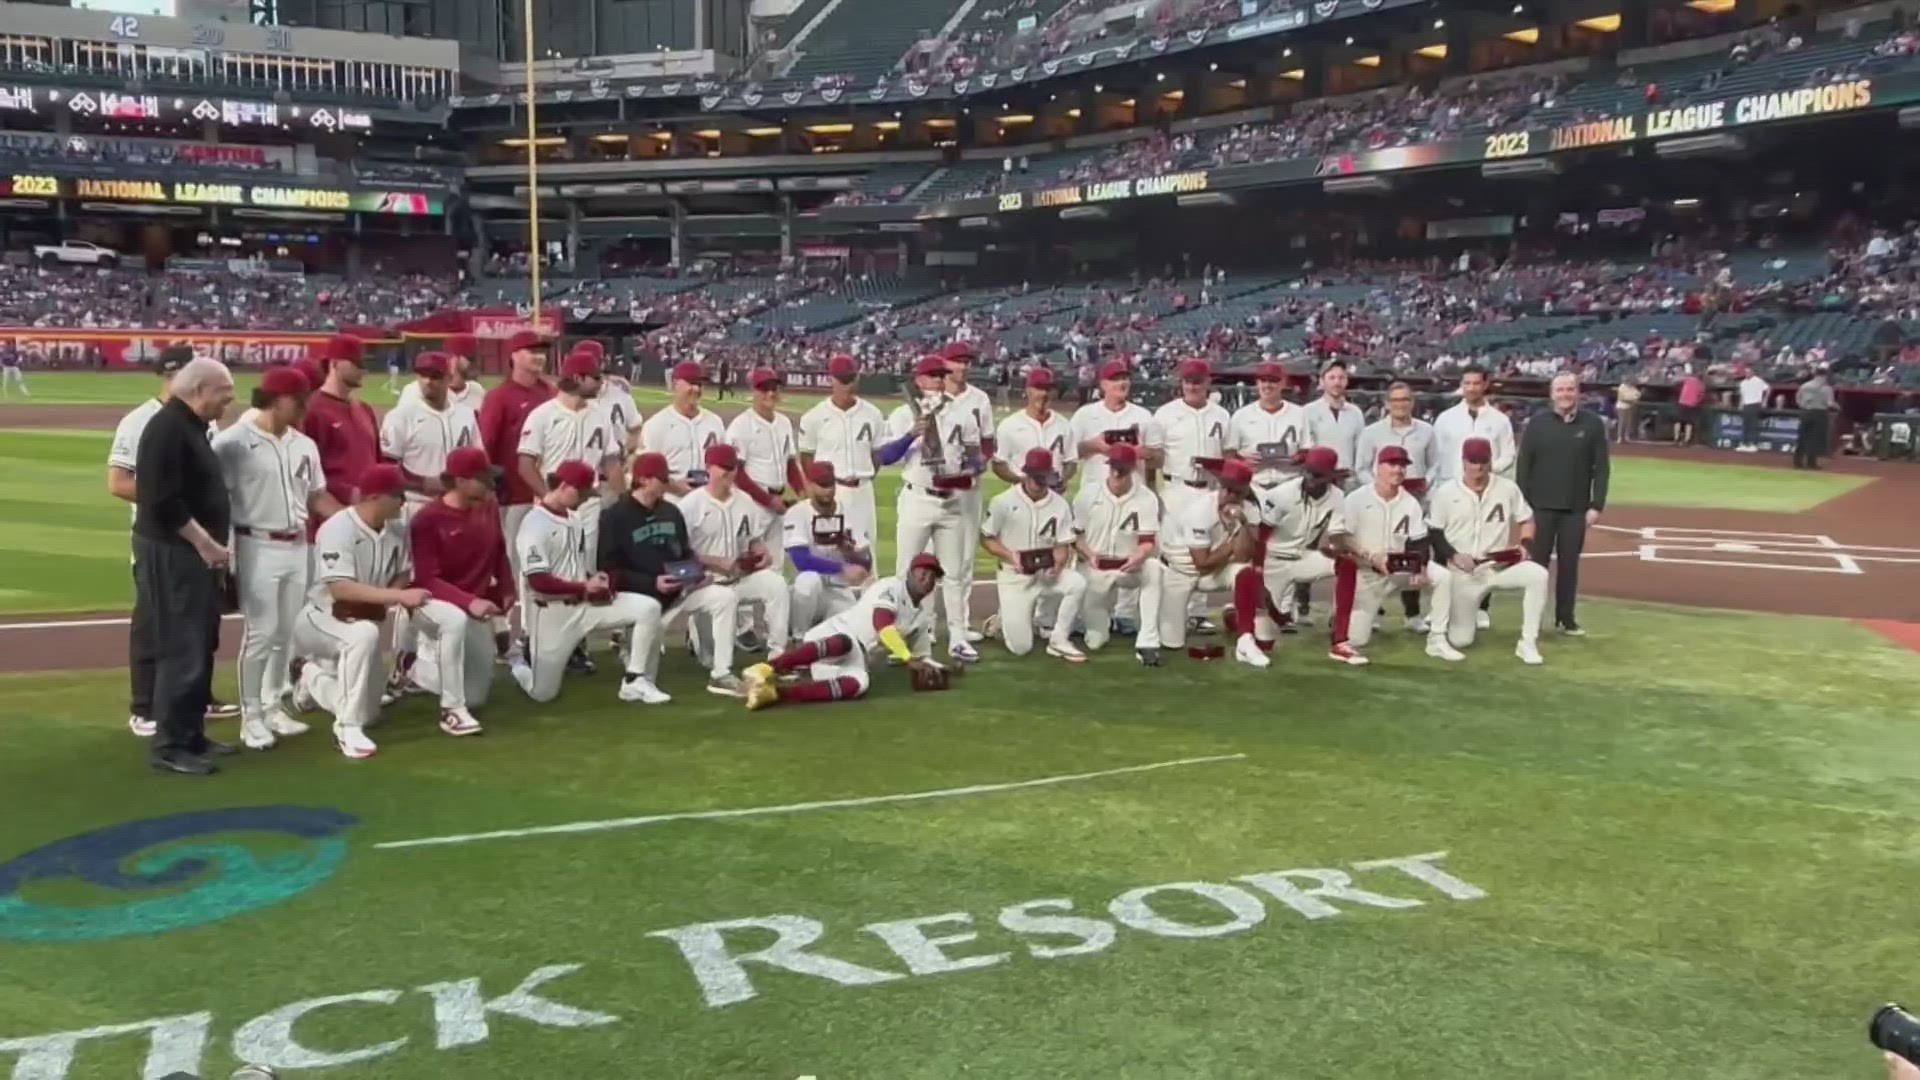 The D-backs got some bling before their win over the Rockies on Friday night, as they received their NL championship rings. Here's a look at the ceremony.